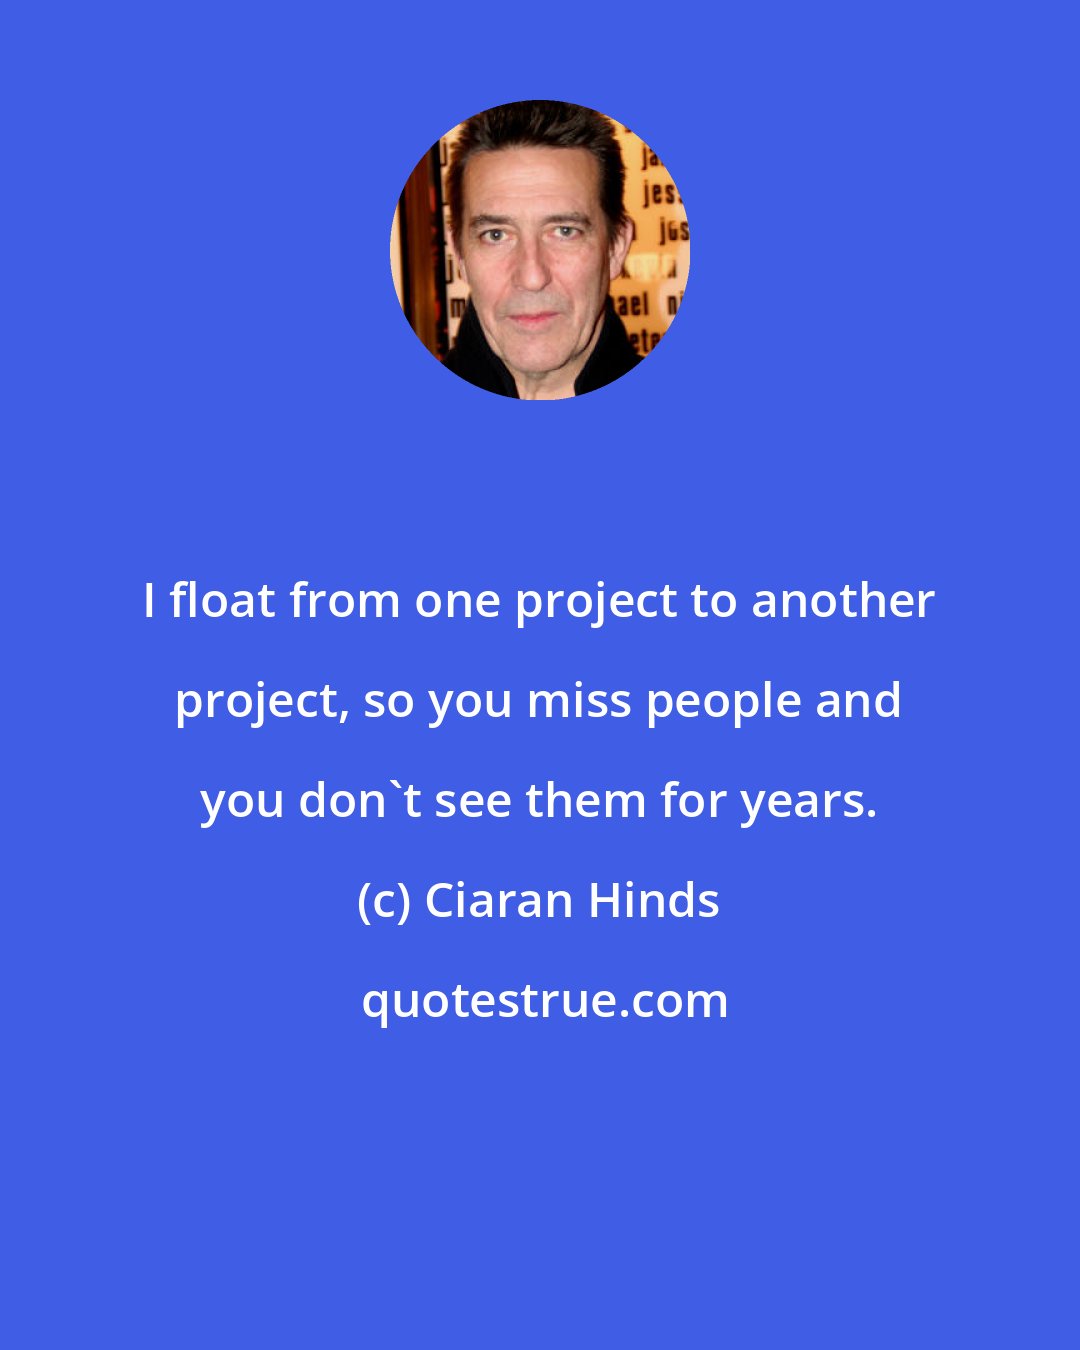 Ciaran Hinds: I float from one project to another project, so you miss people and you don't see them for years.